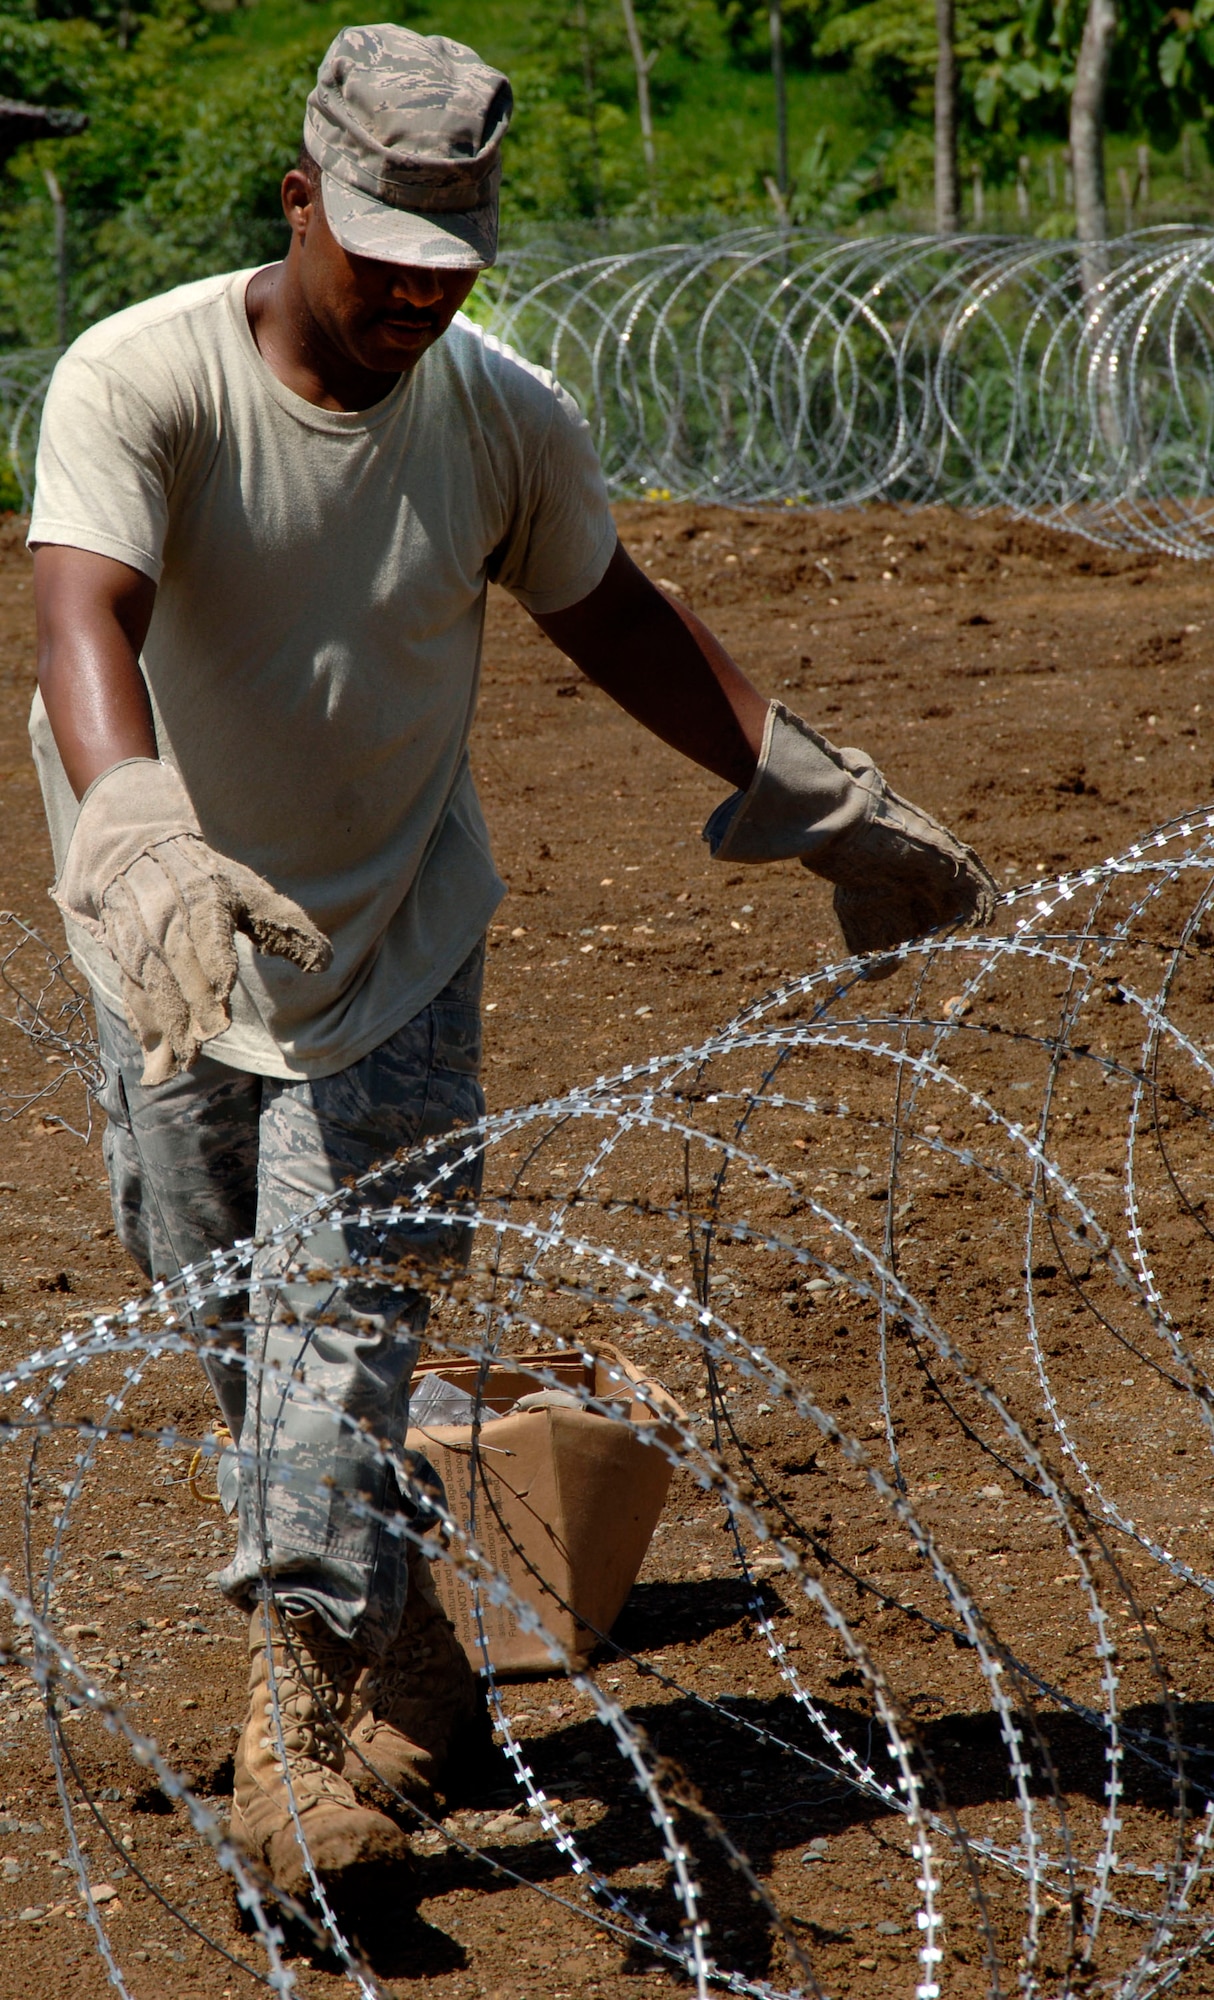 Master Sgt. Benny Baker, 12th Air Force (Air Forces Southern), places concertina wire around the temporary encampment that will house more than 250 Airmen, Soldiers, and Marines for New Horizons Panama 2010. (U.S. Air Force photo/Tech. Sgt. Eric Petosky)